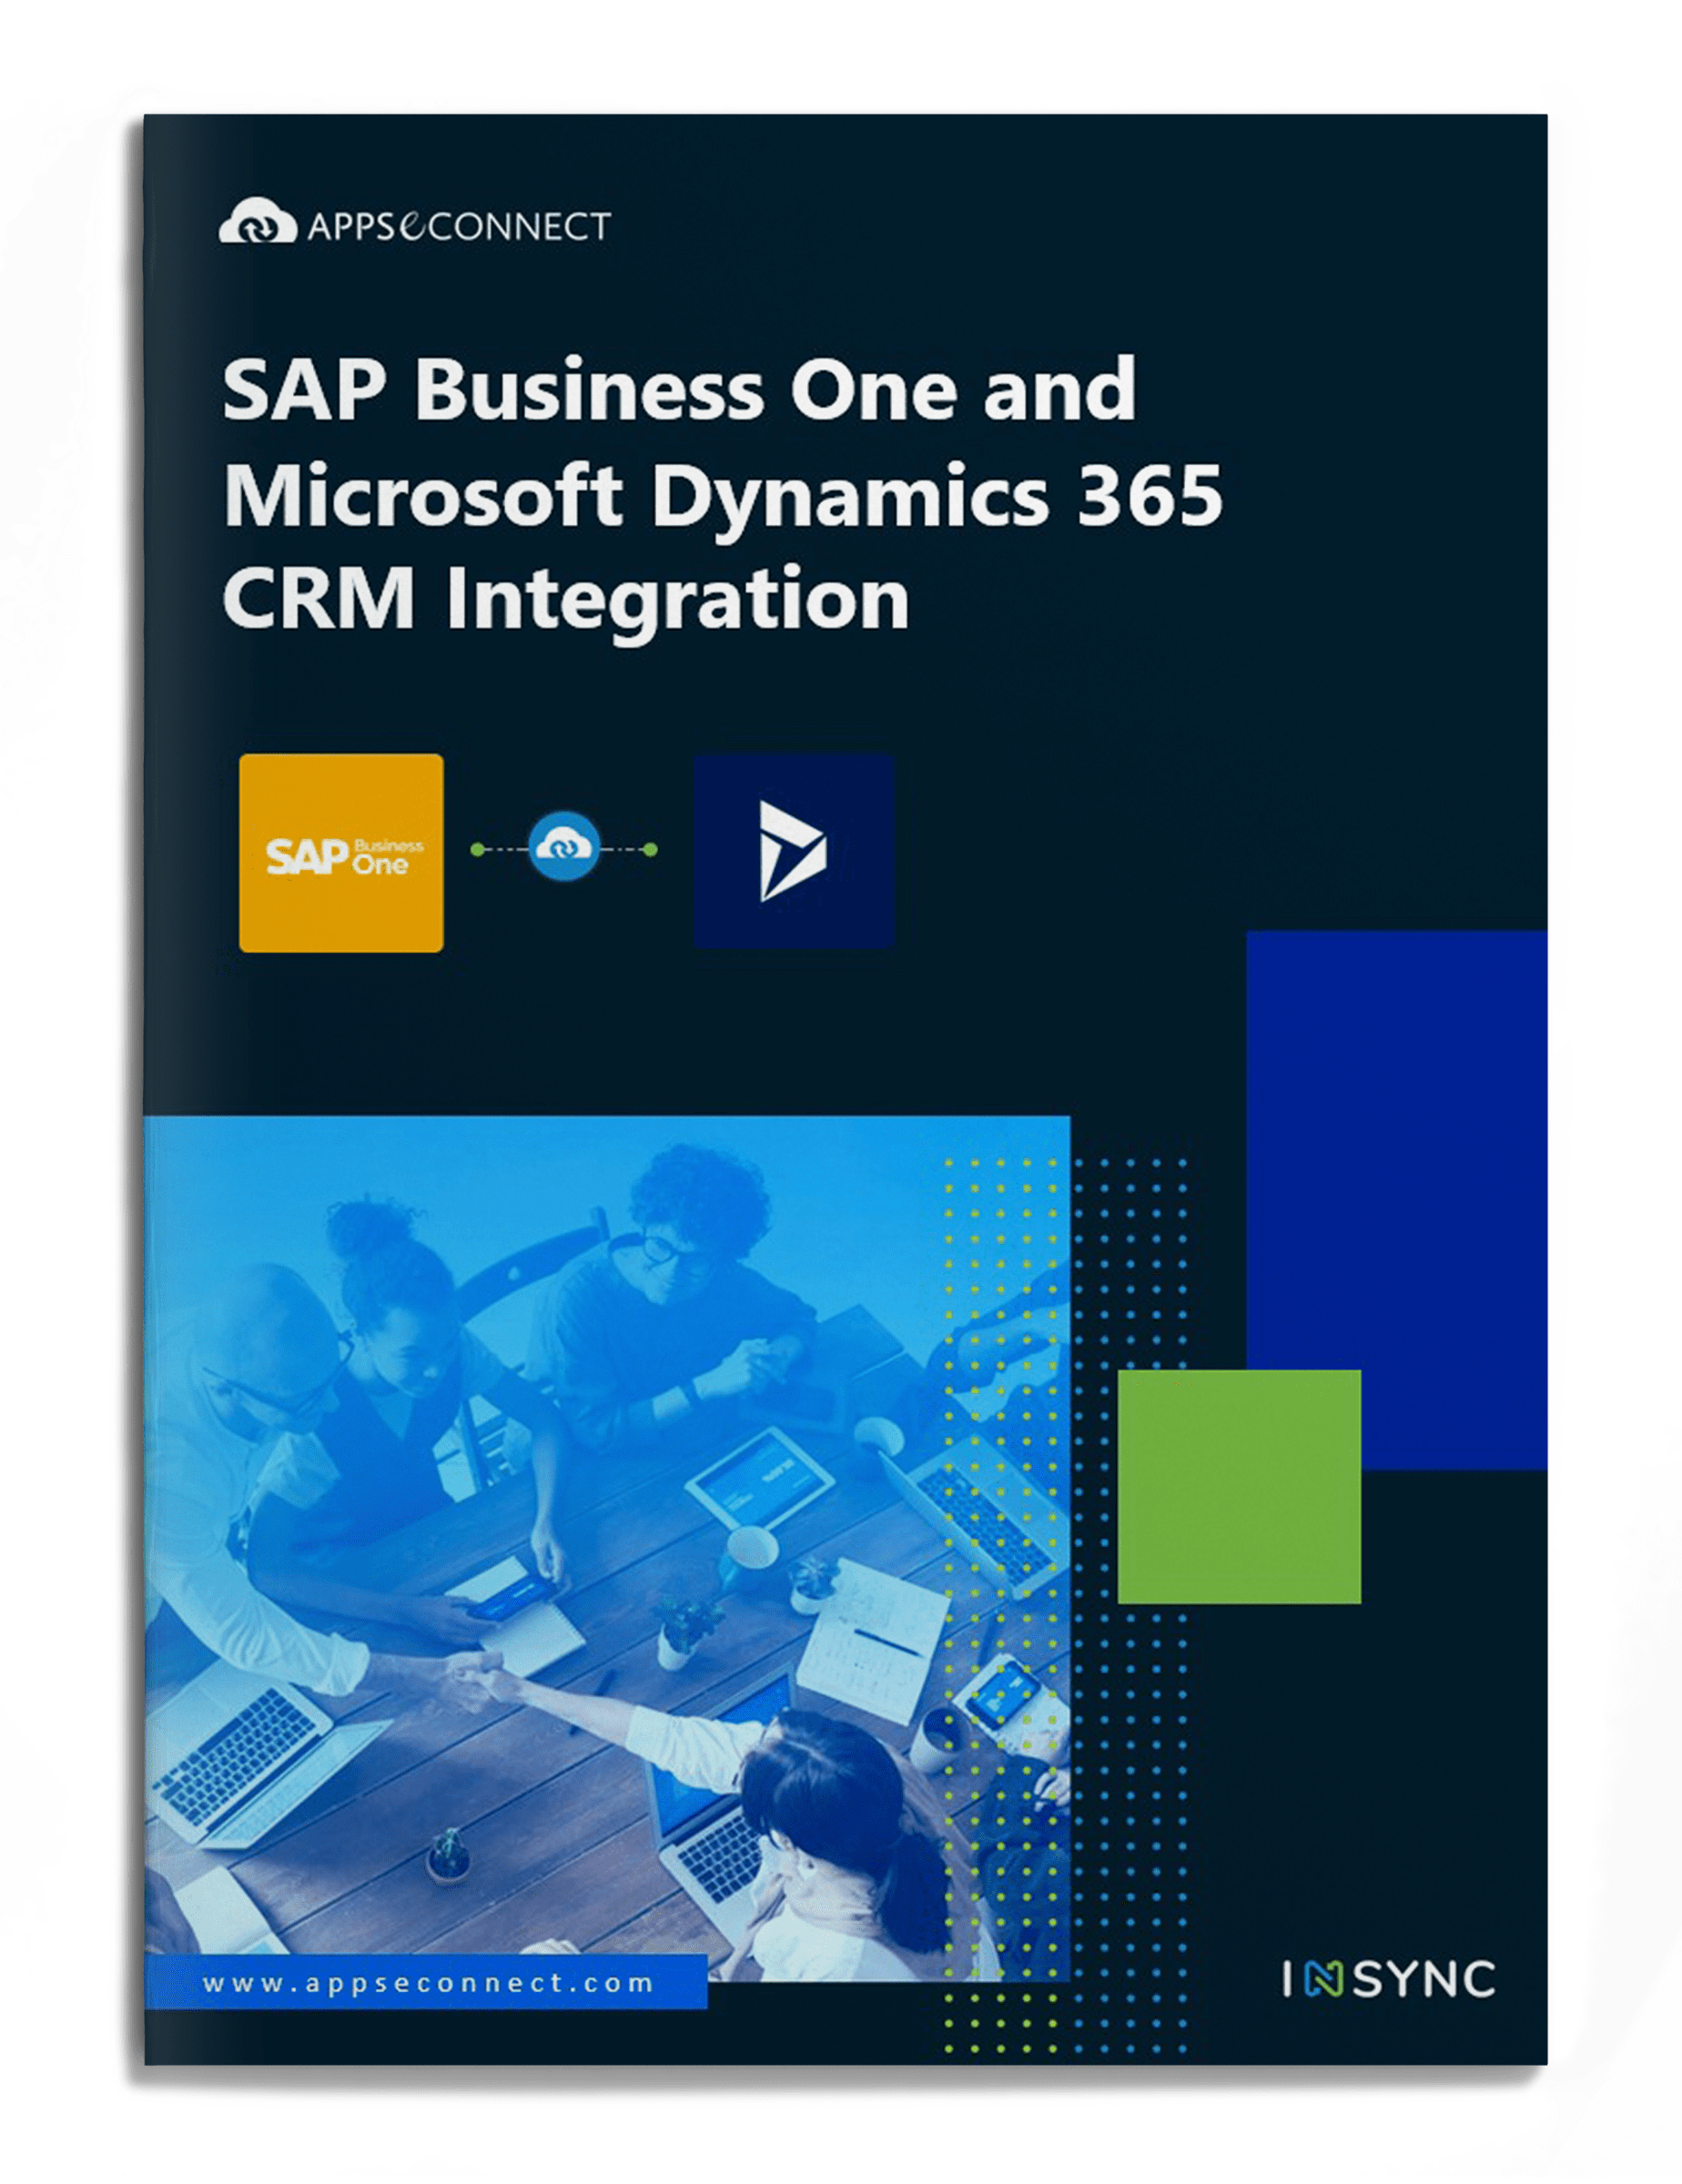 SAP Business One and Microsoft Dynamics 365 CRM Integration brochure Cover